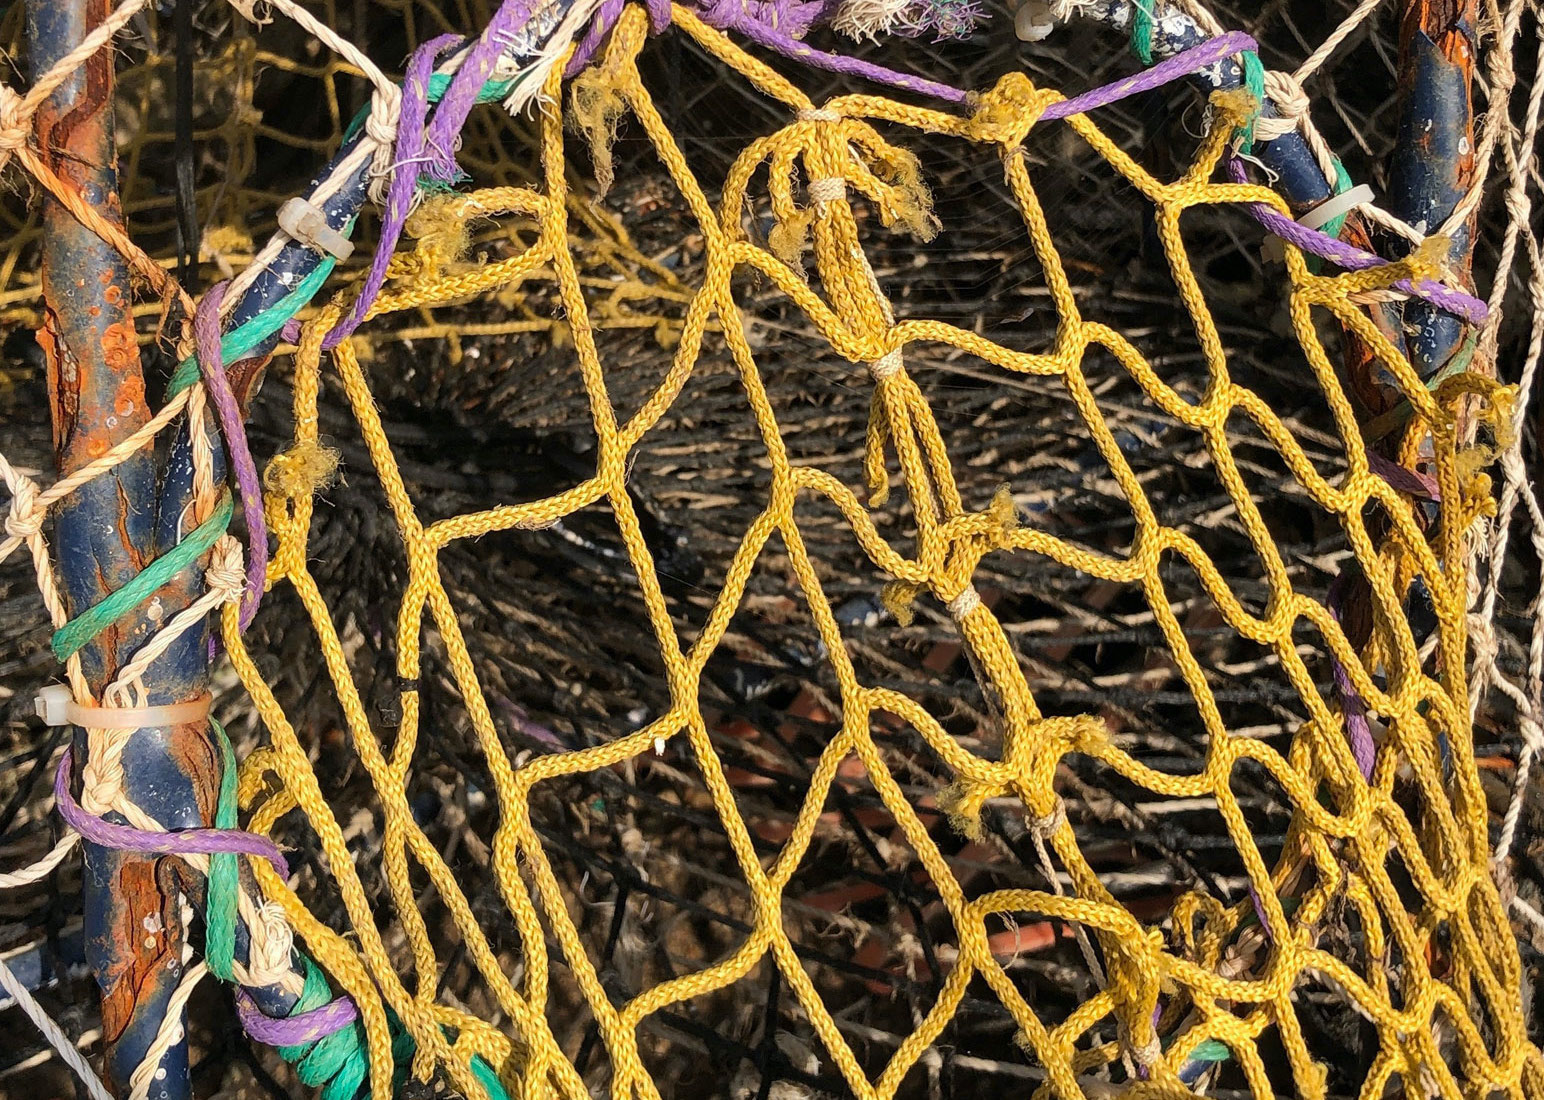 Photograph of yellow netting on harbour